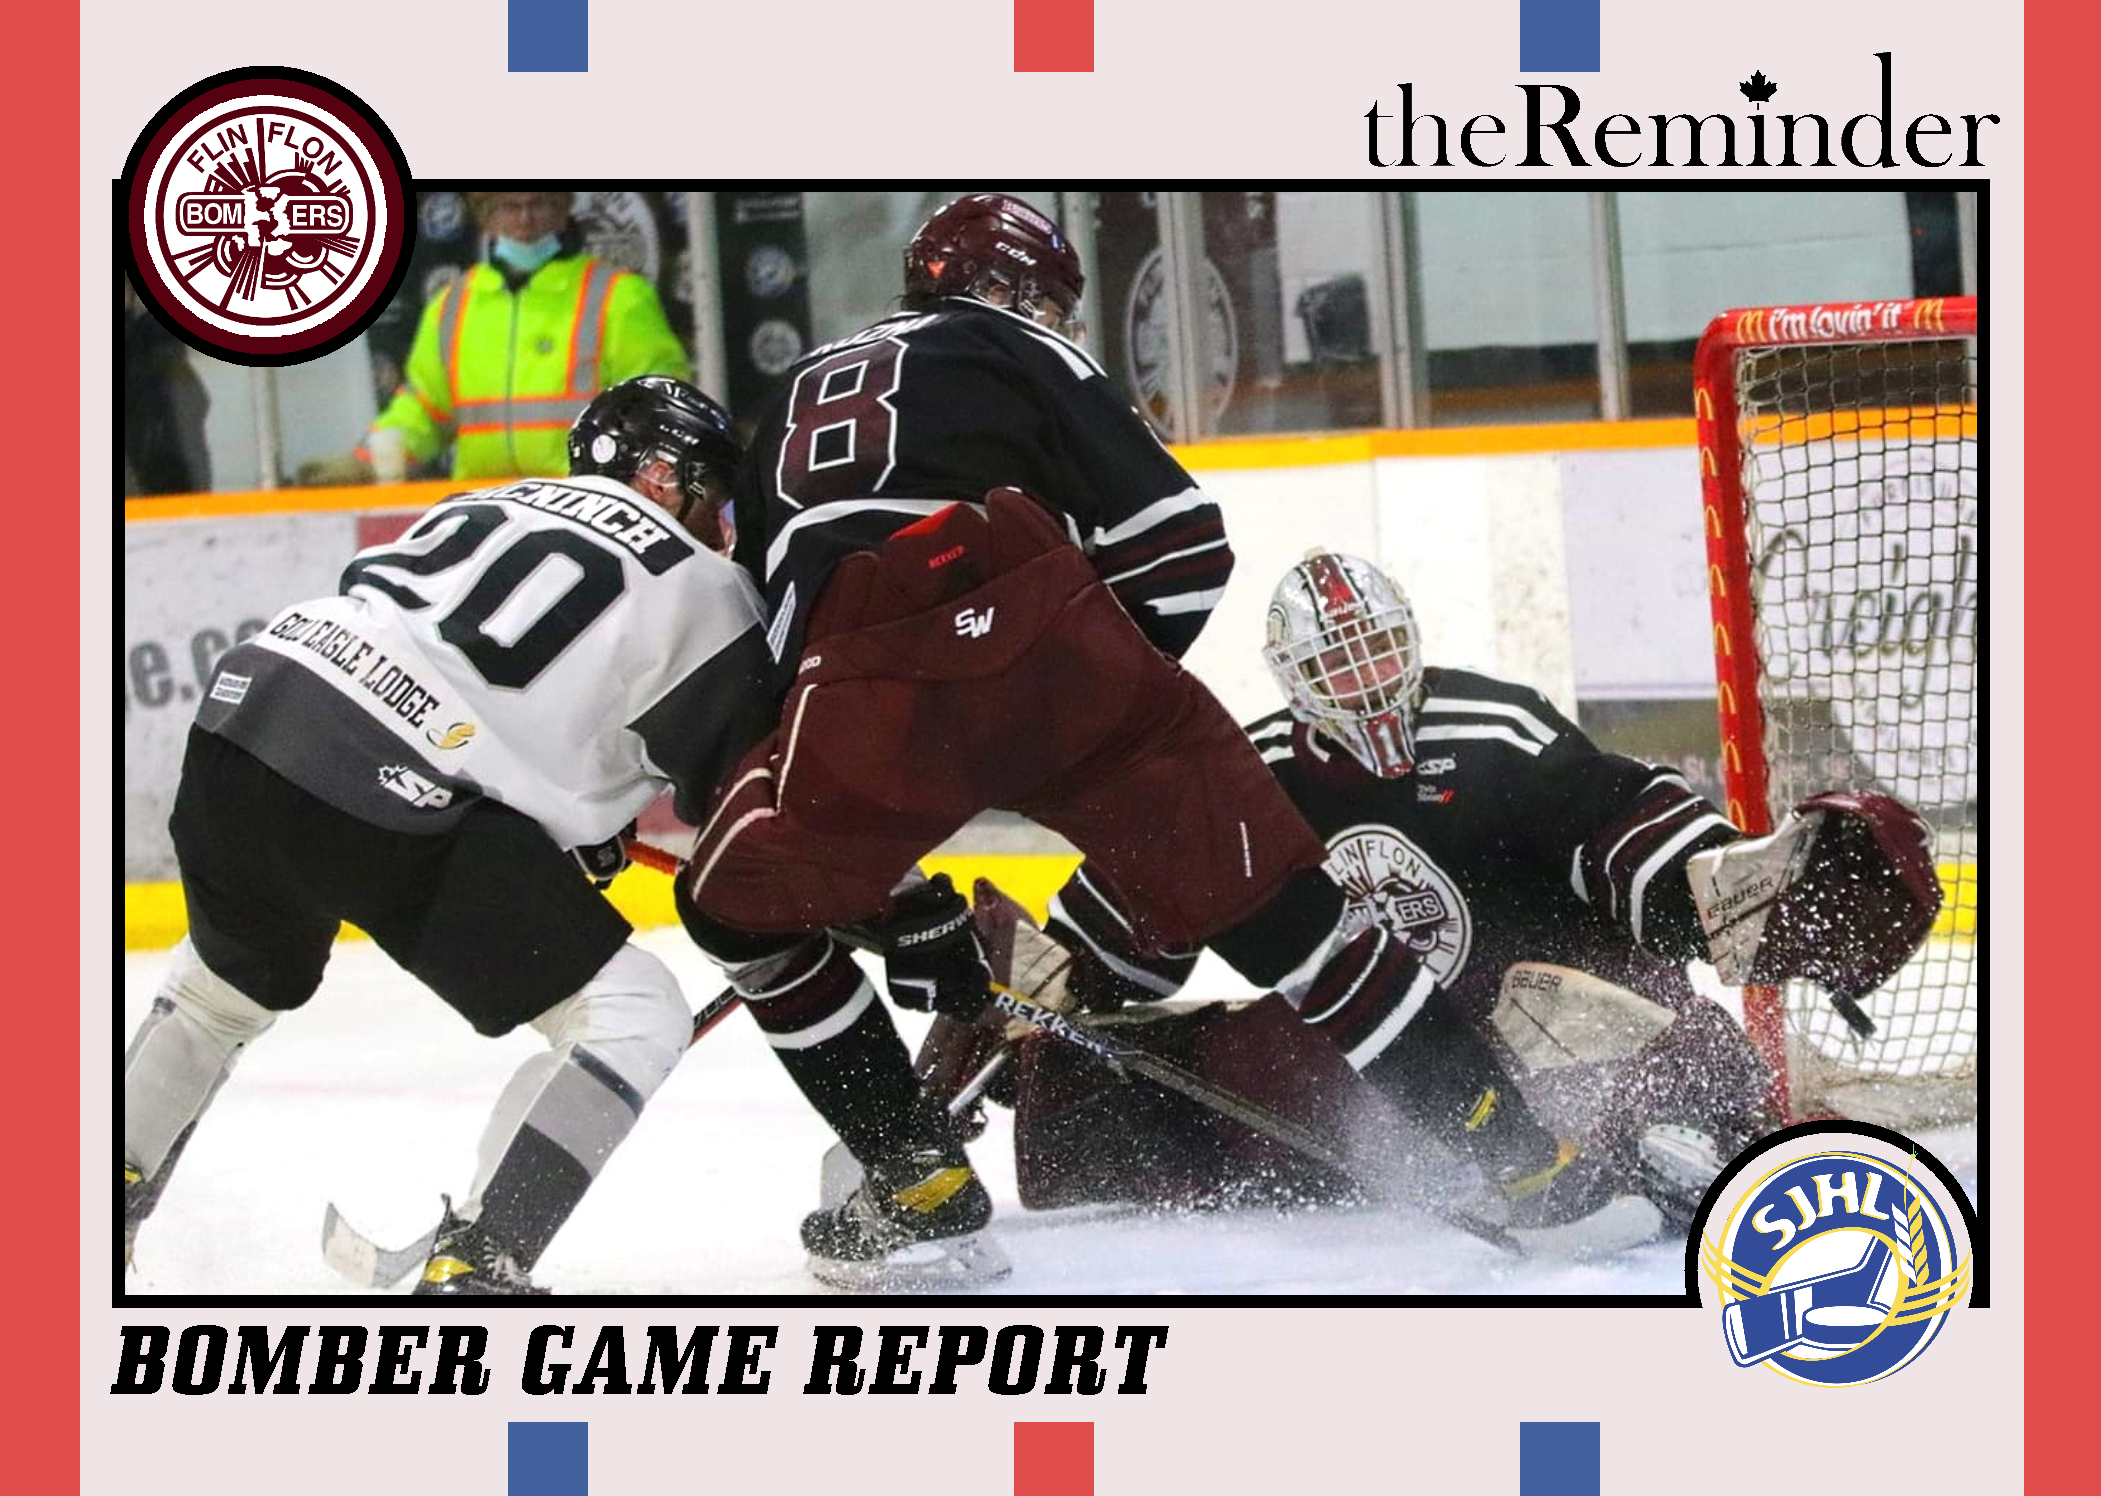 Bomber Game Report: Injury bug continues to bite as Flin Flon